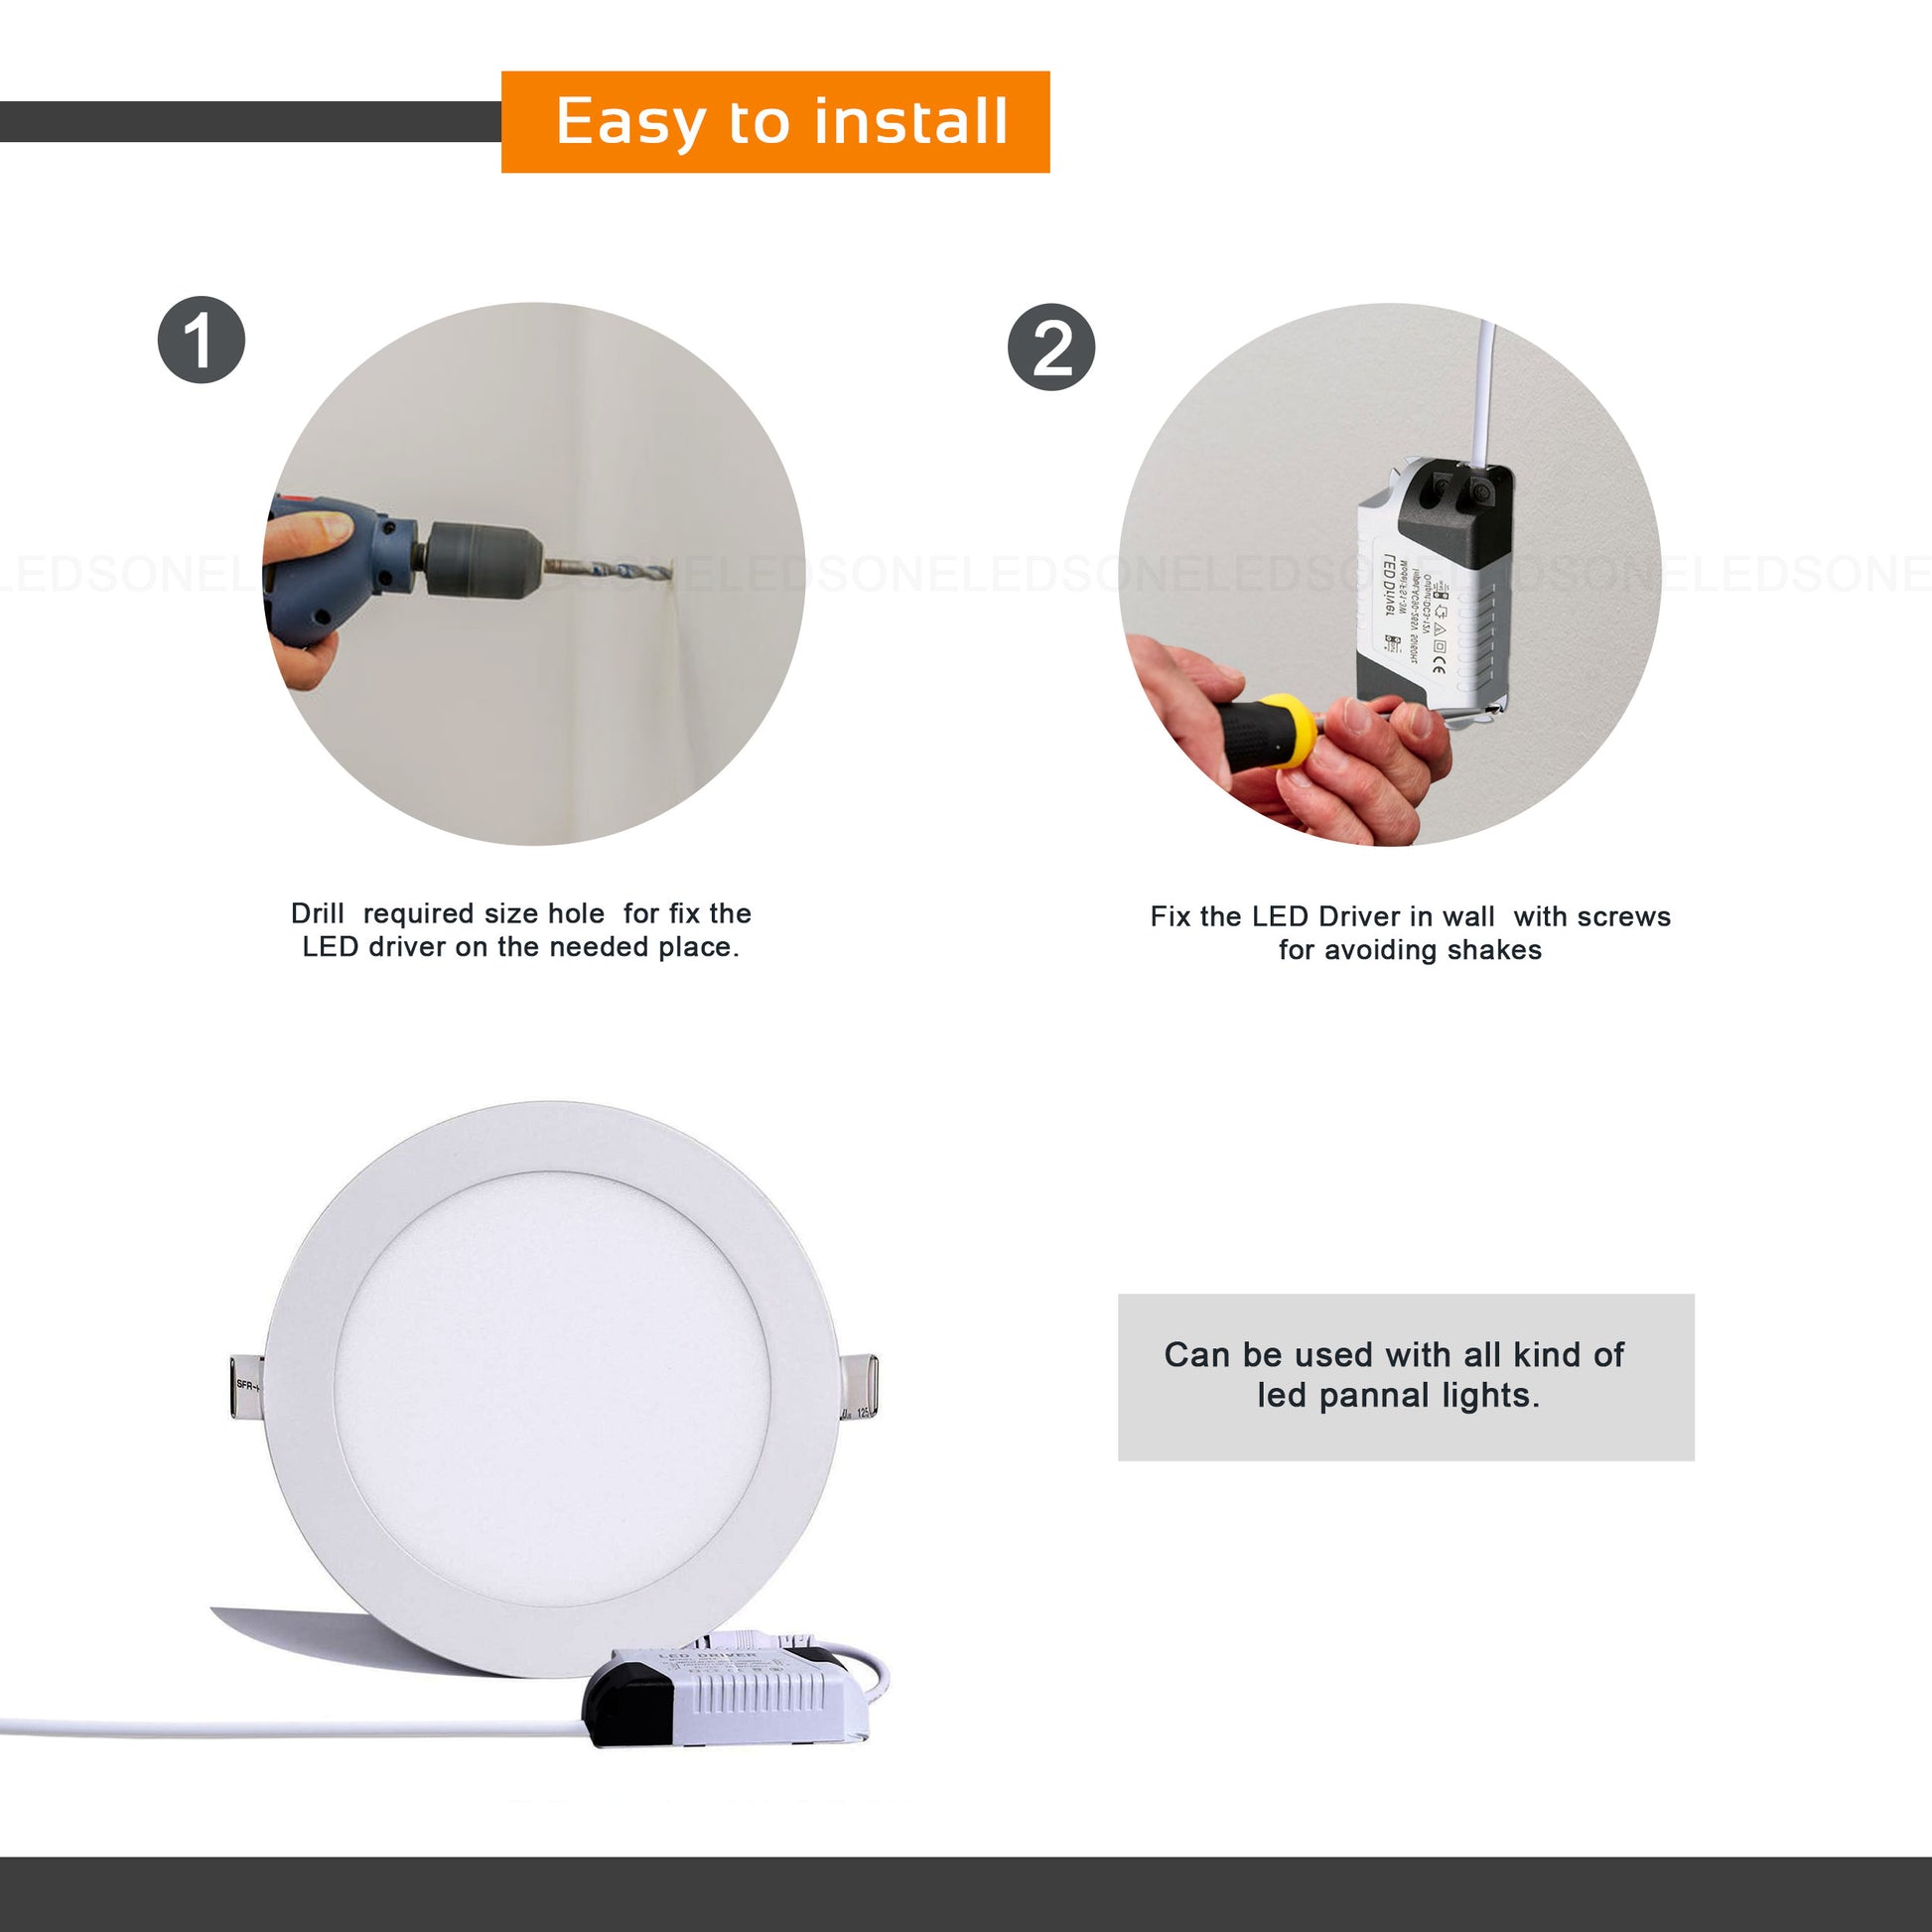 7w LED Driver - Easy to install